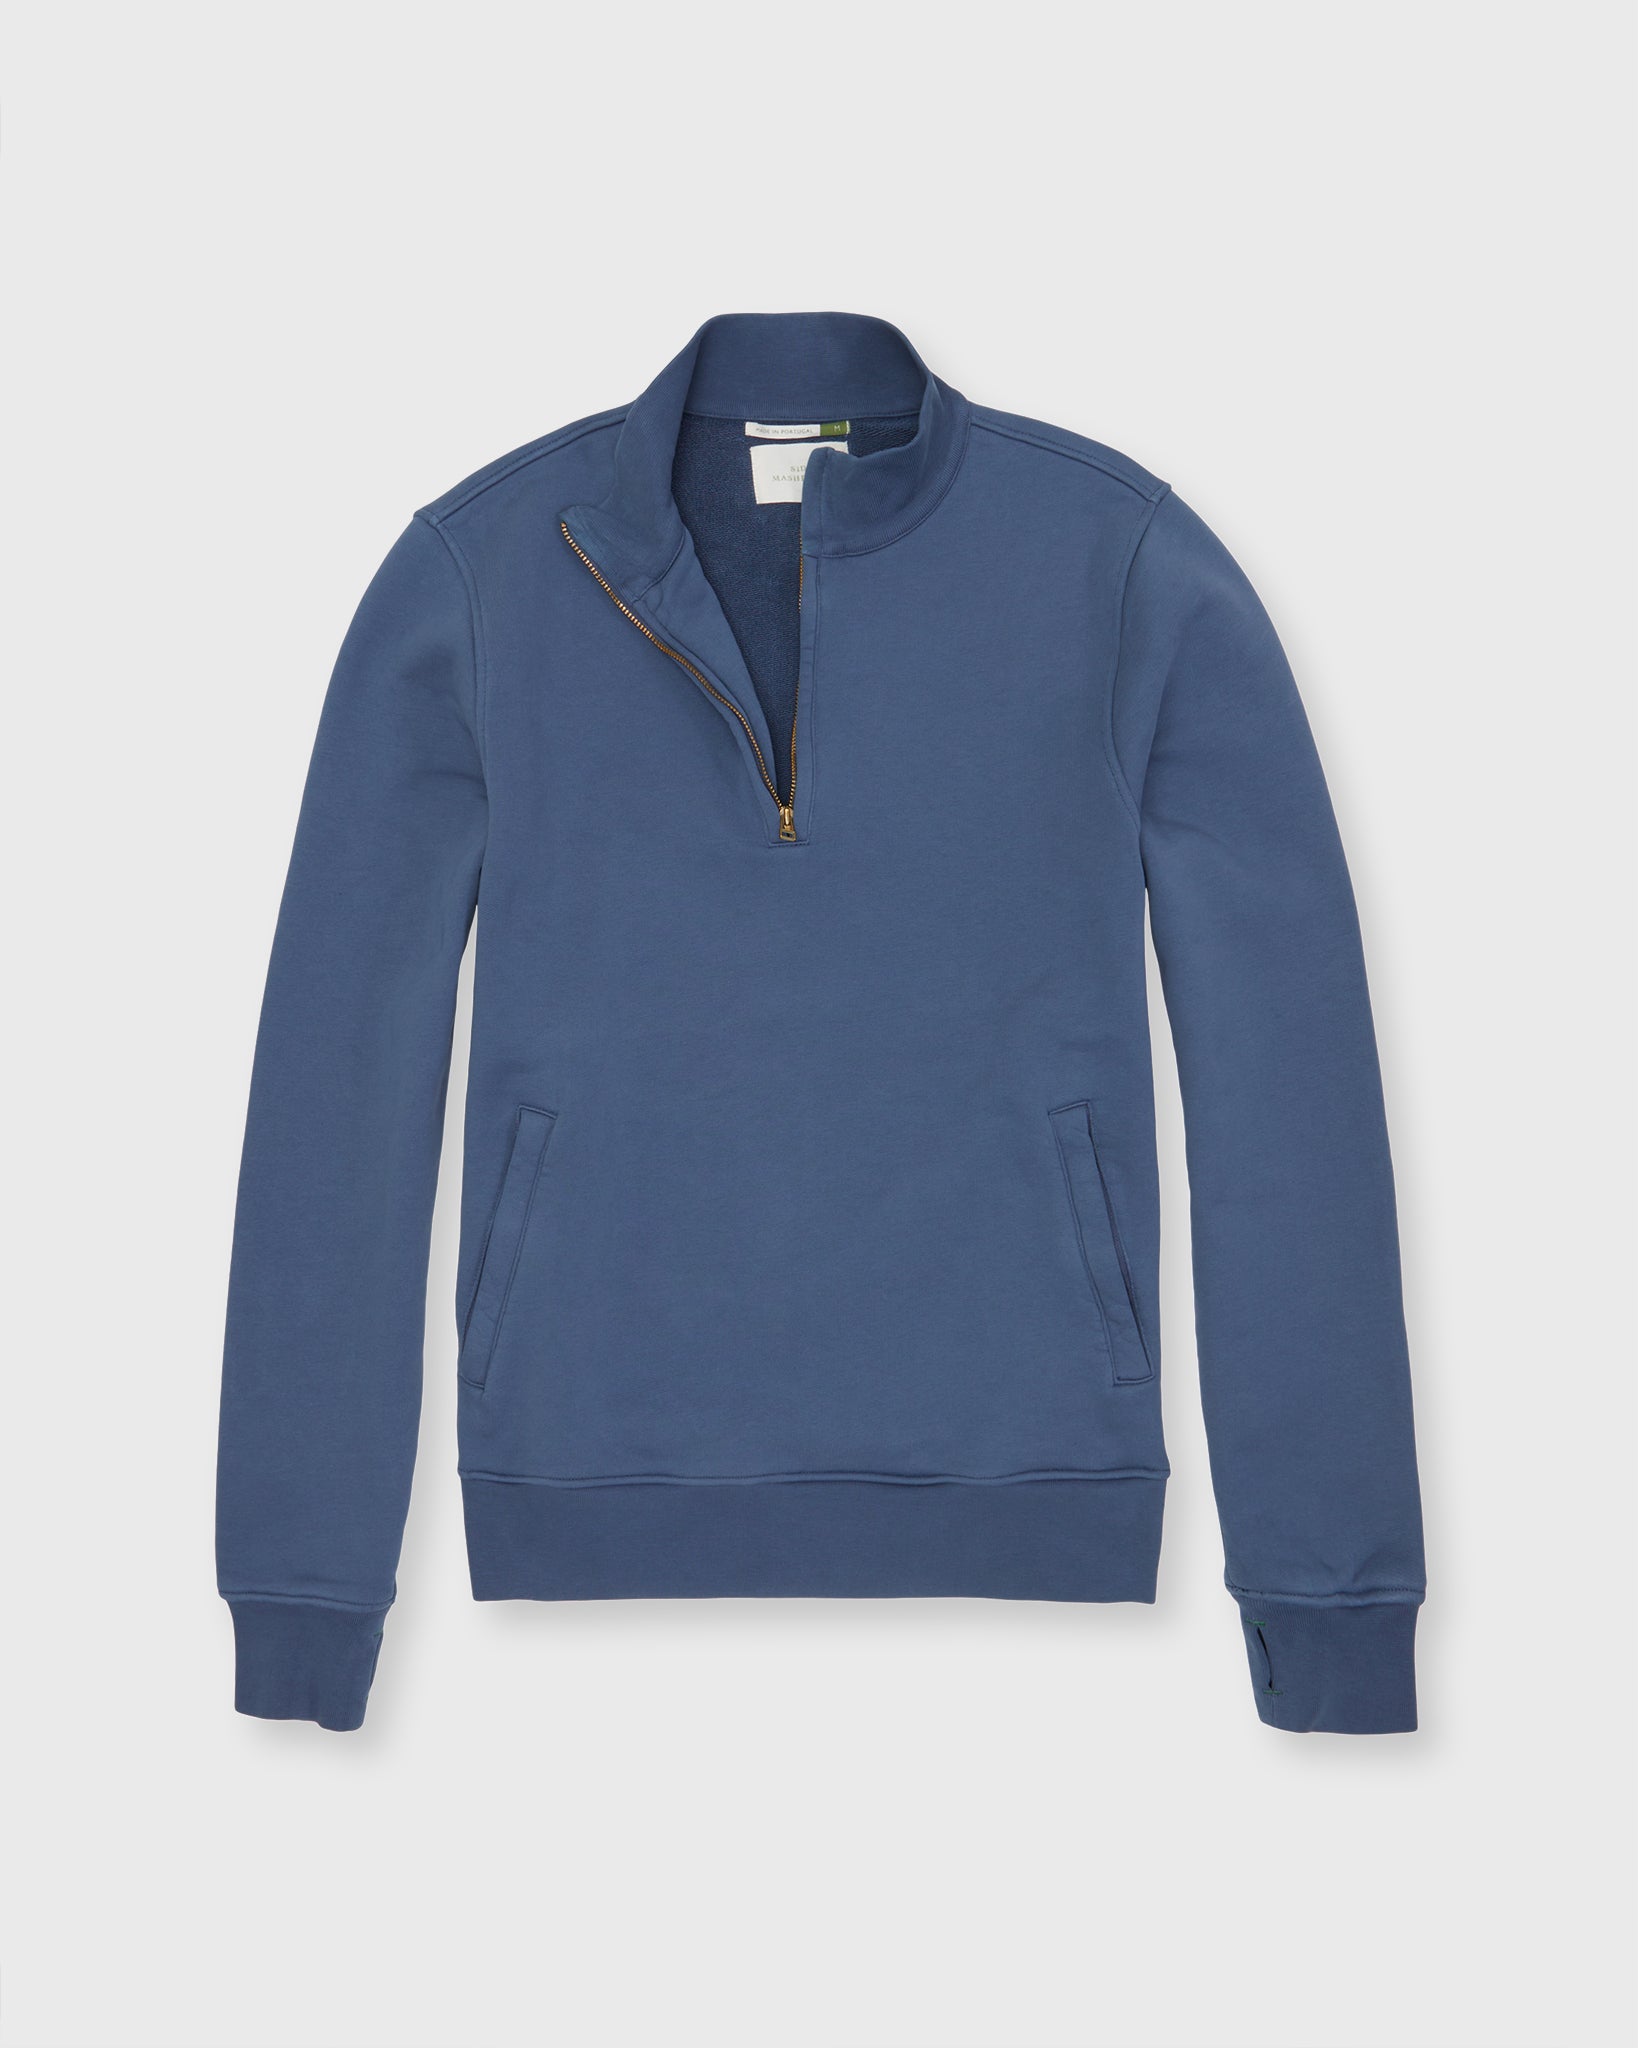 Half-Zip Pullover in Steel Blue French Terry